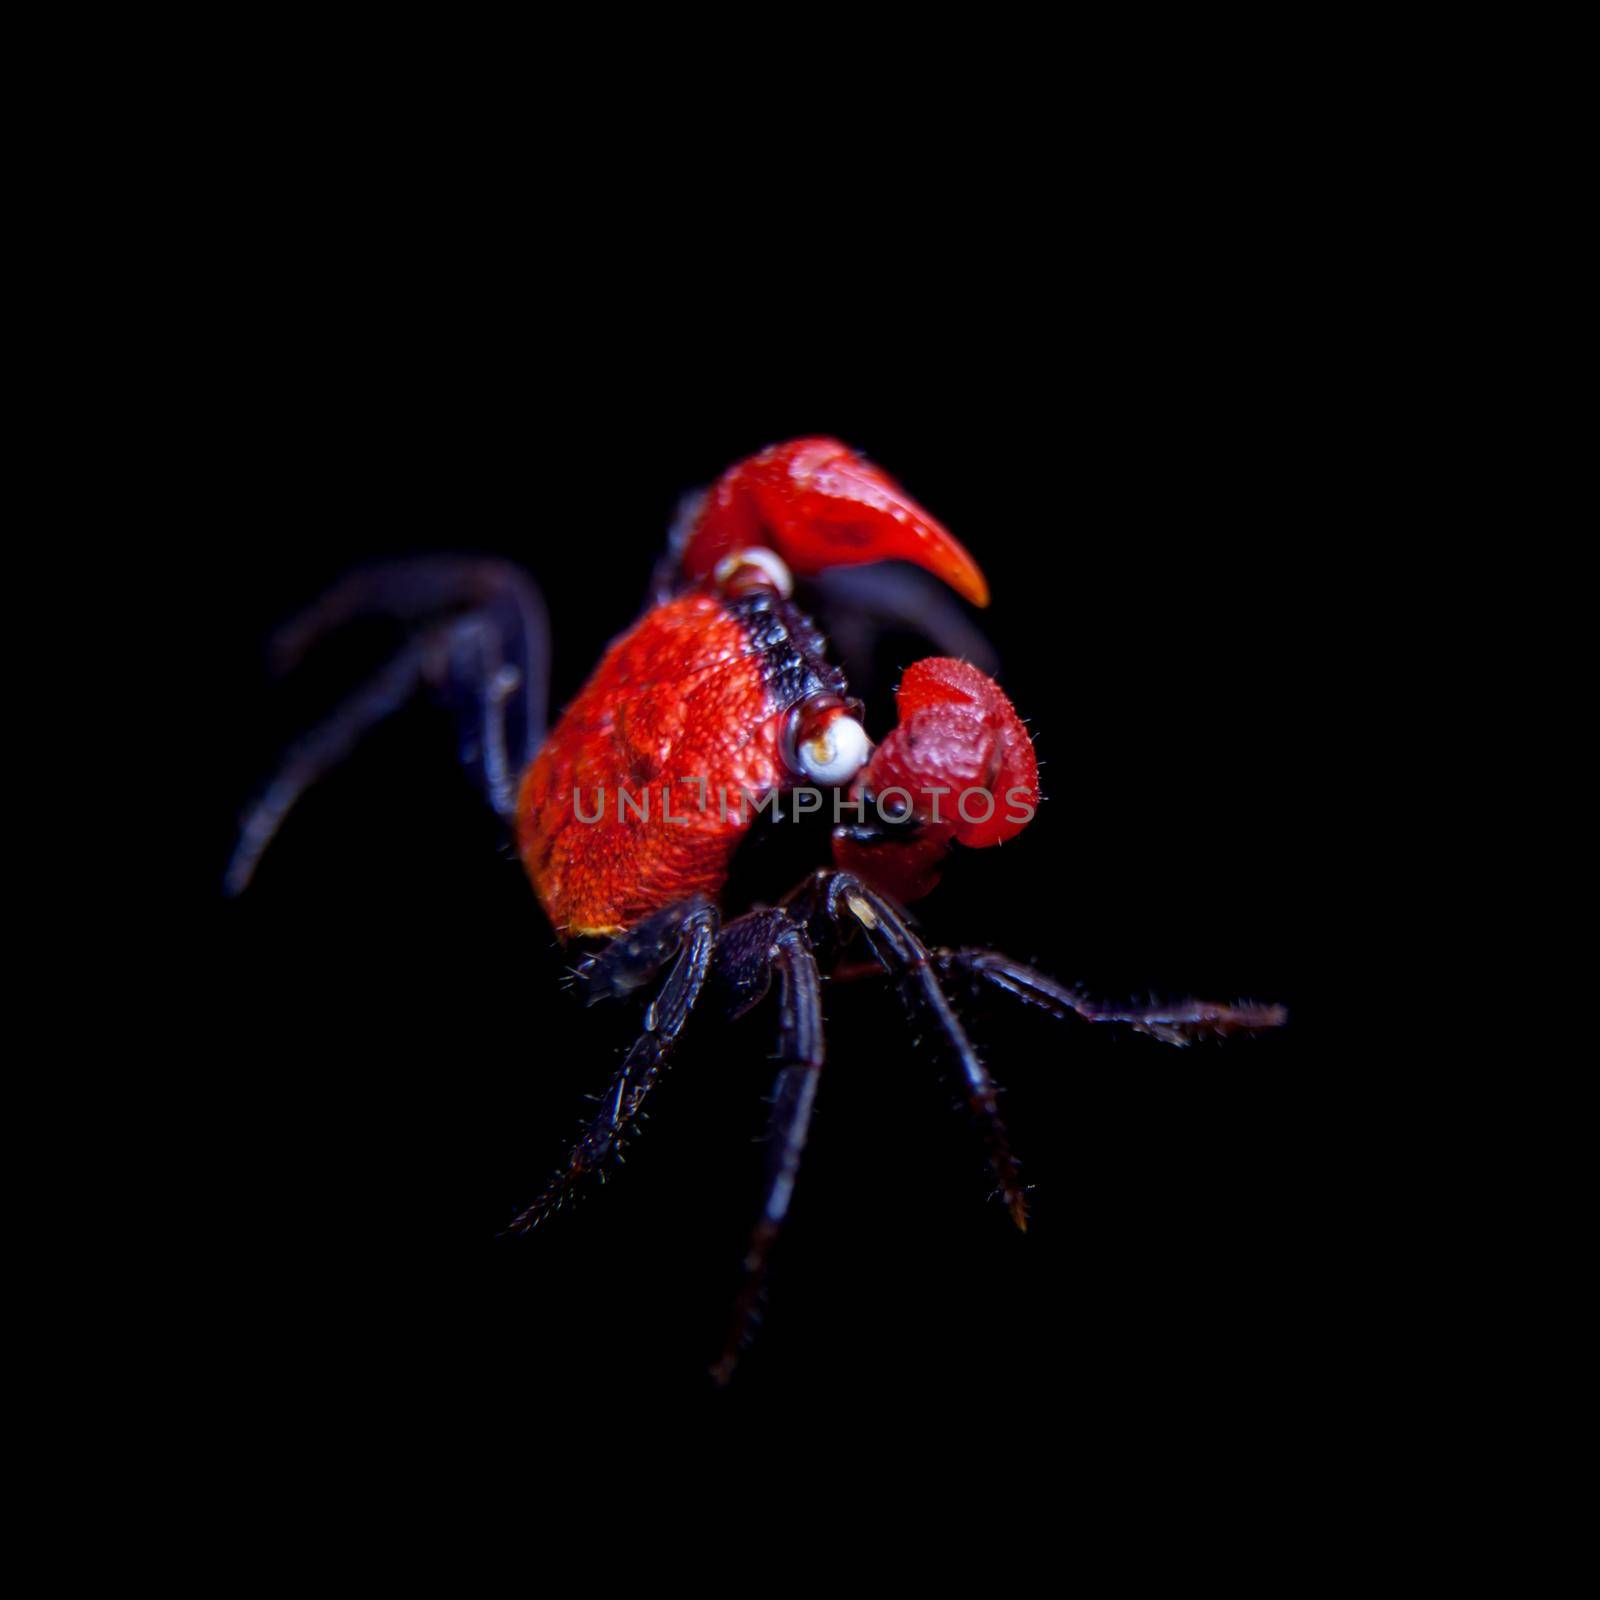 Little Red devil Crab, Geosesarma hagen, isolated on black background